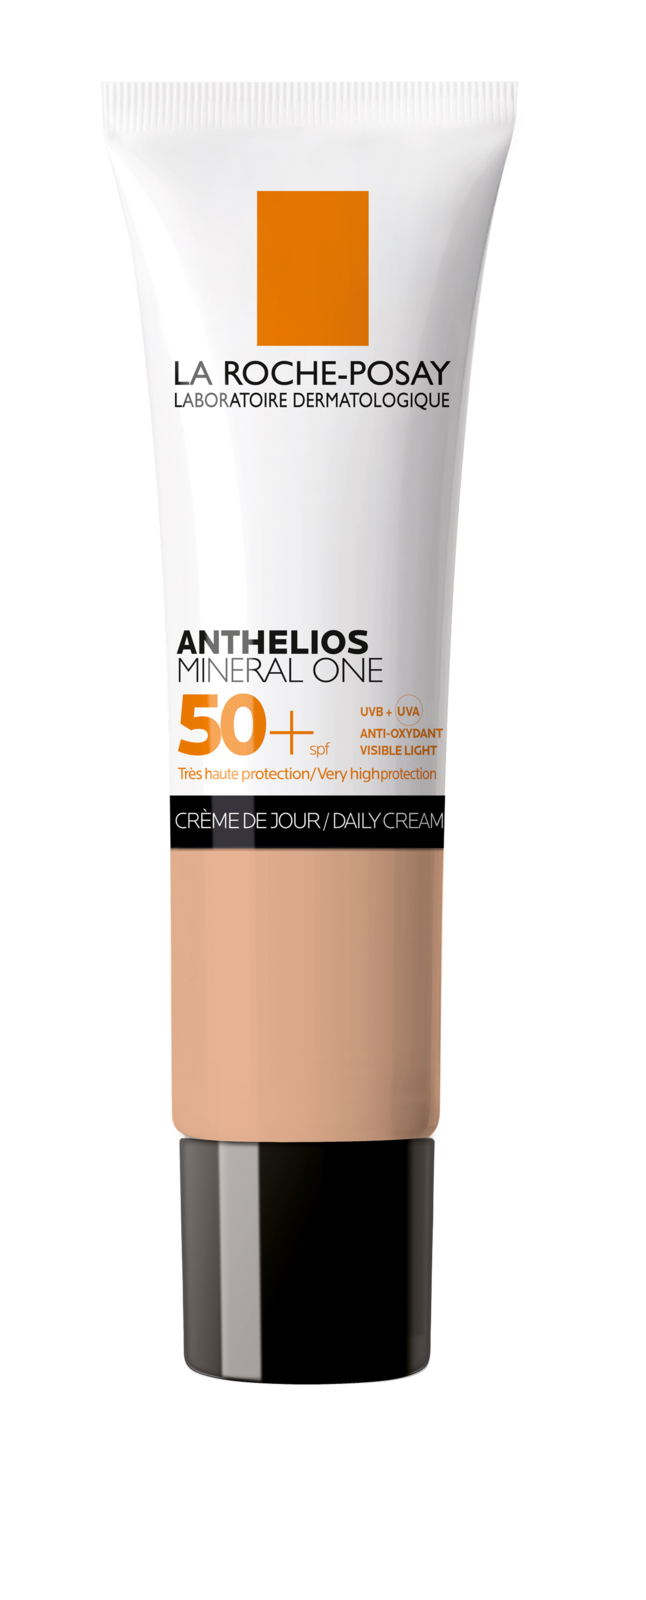 Image of La Roche-Posay Anthelios Mineral One SPF50 - Kleur 03